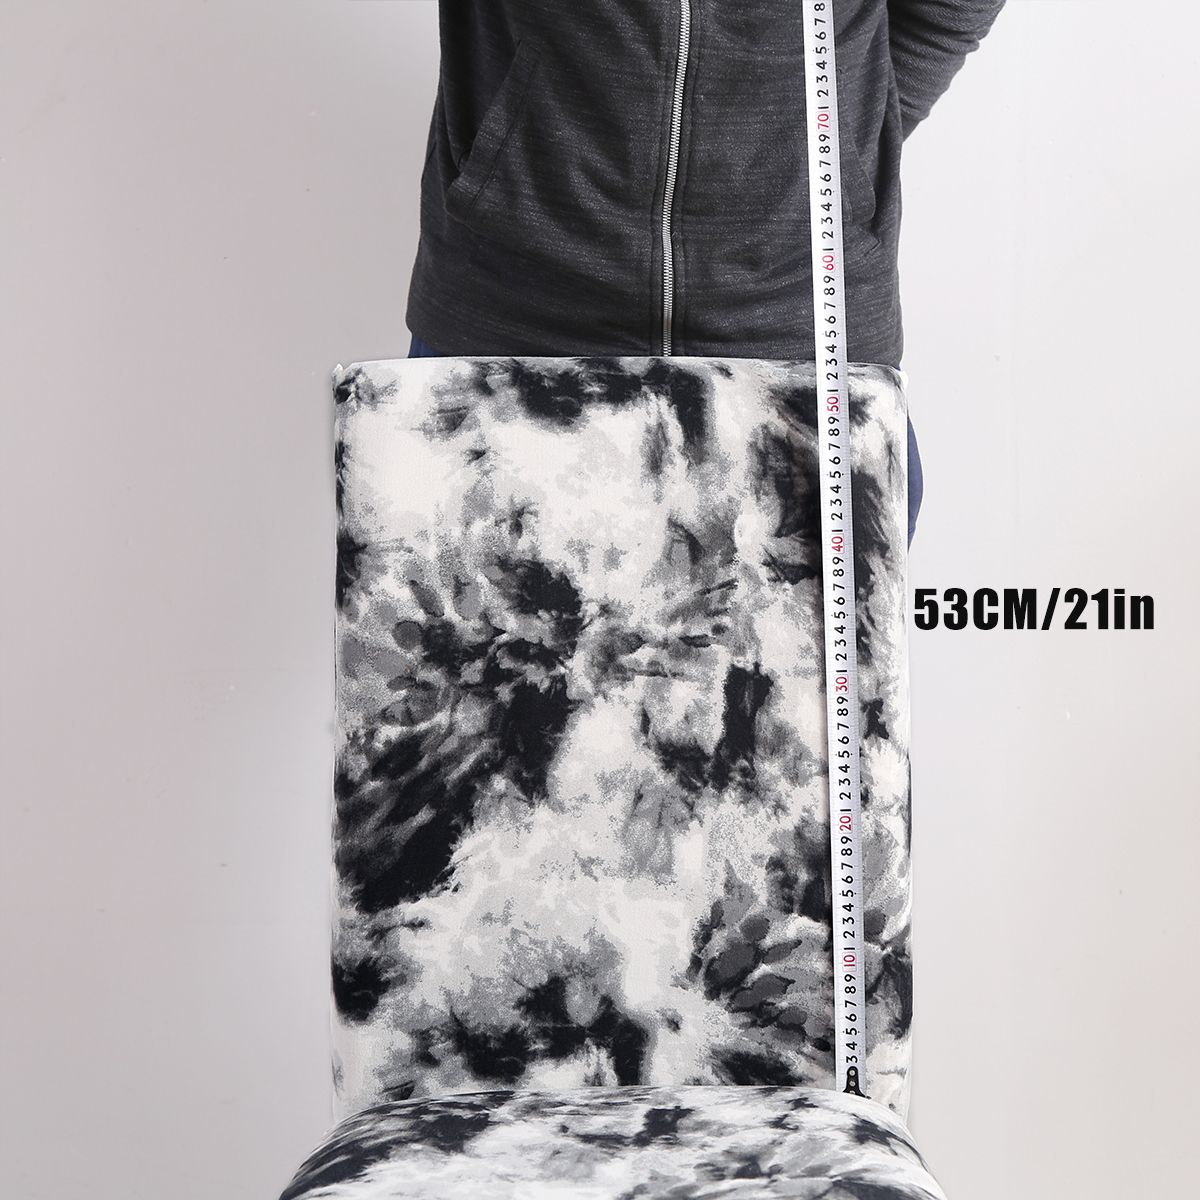 Stretch-Chair-Cover-Tie-Dyeing-Spray-Style-Home-Decorations-1590585